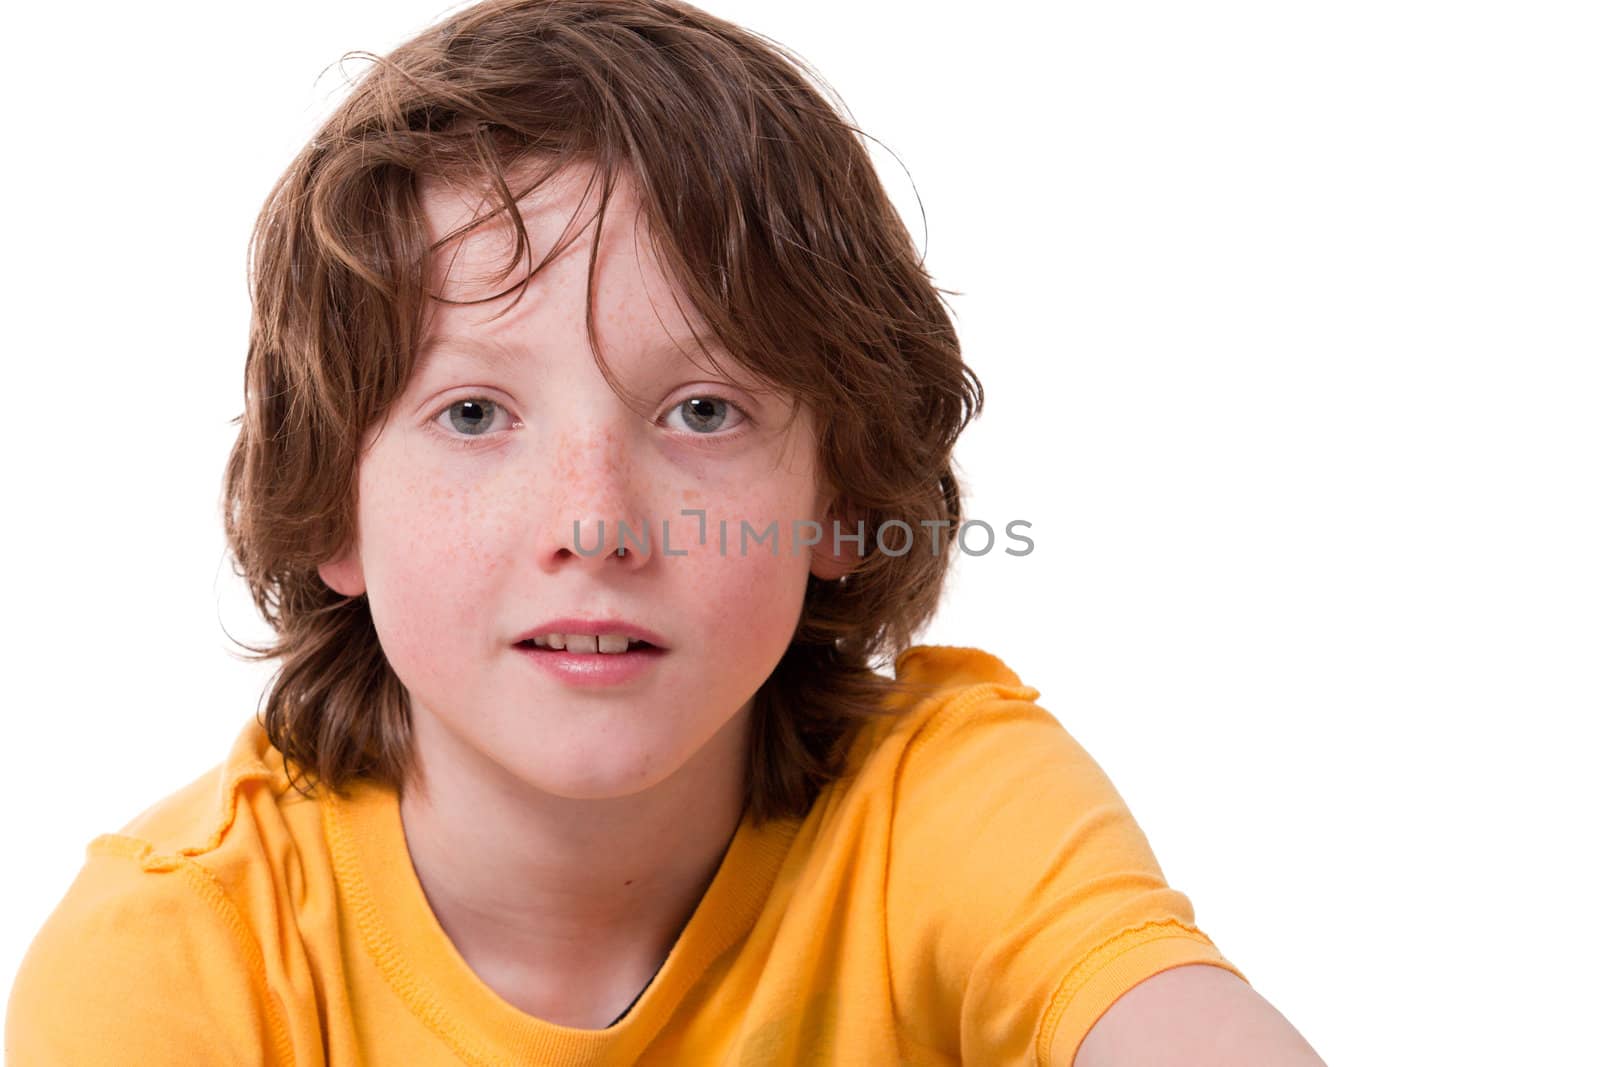 Young children isolated on a white background